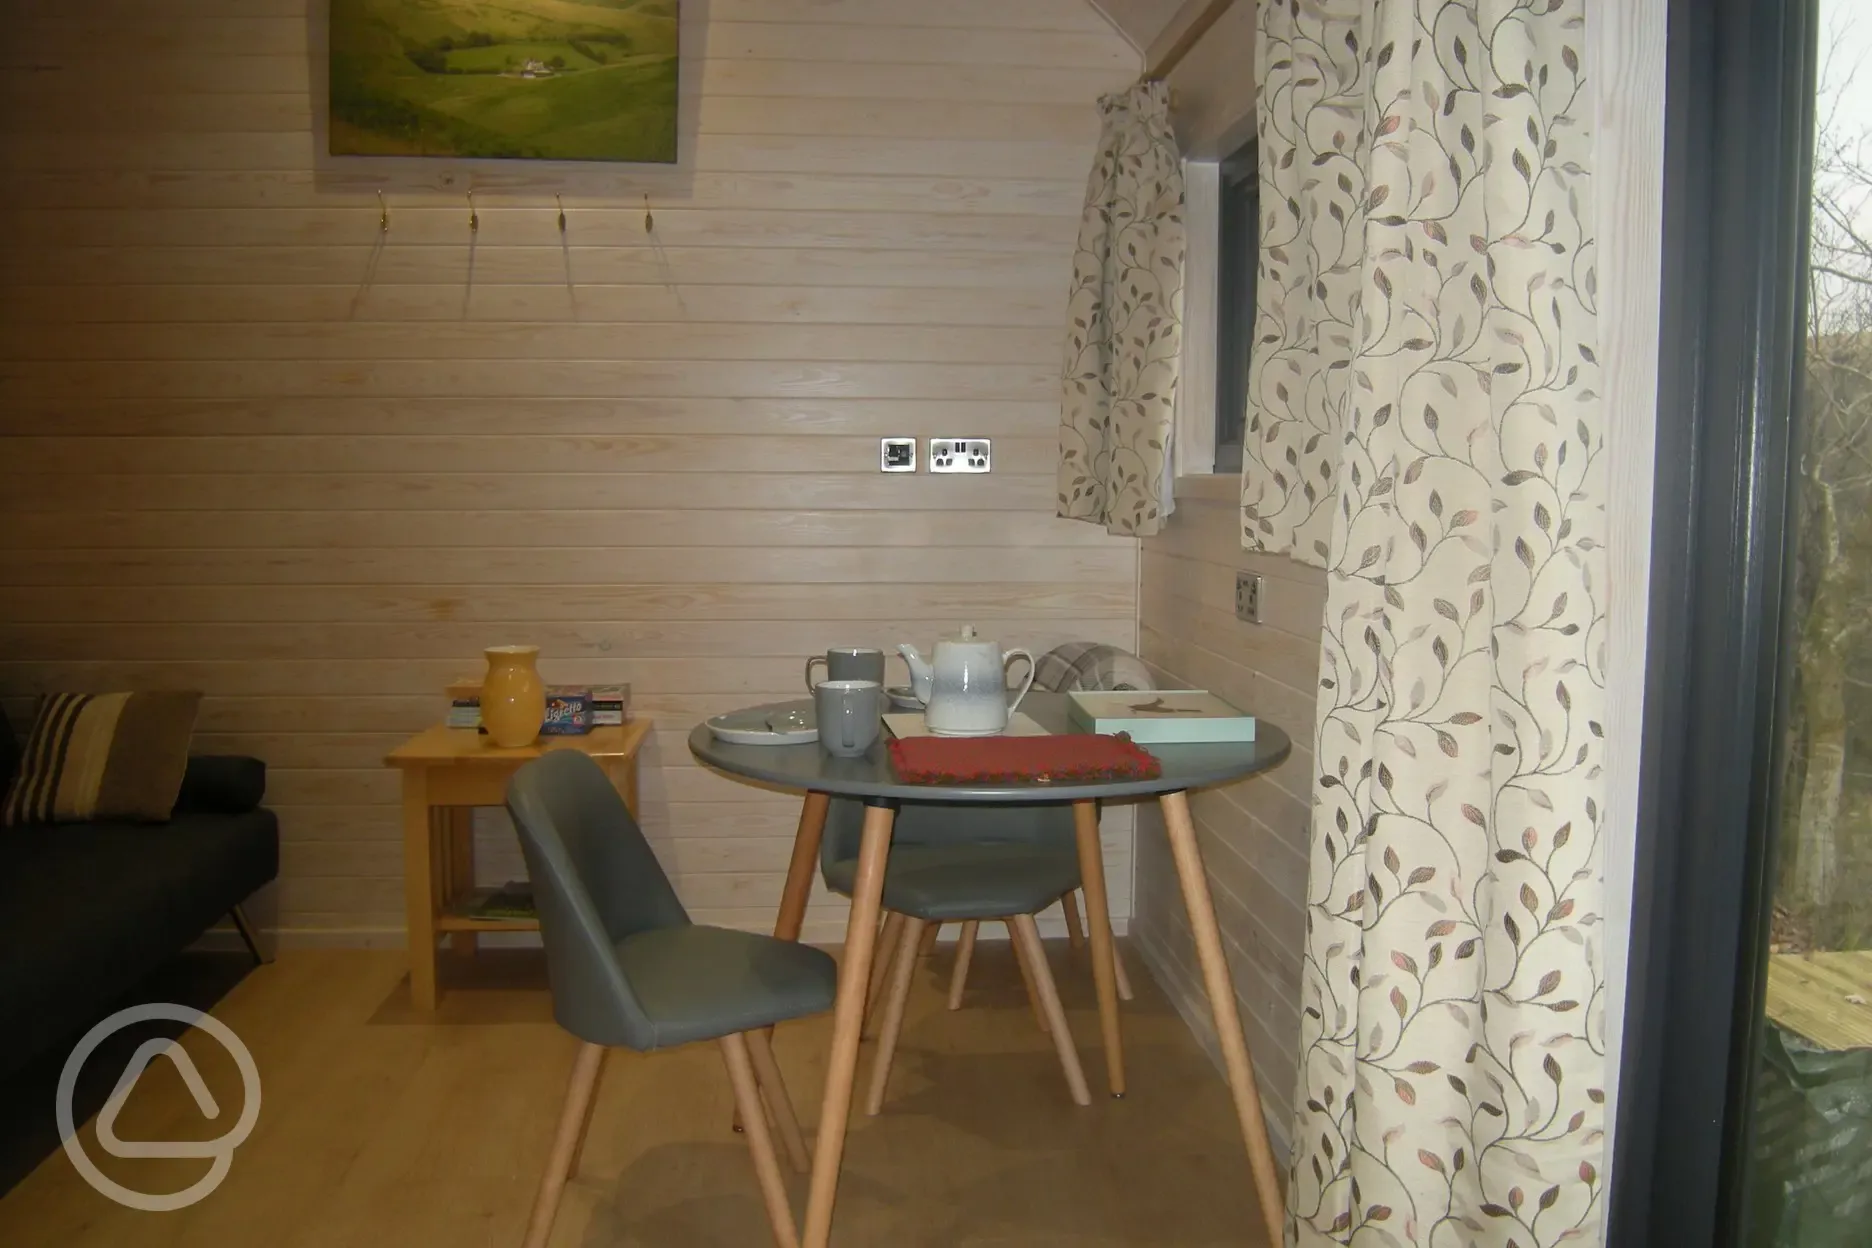 Inside shepherd's hut, seating area with bed settee on left